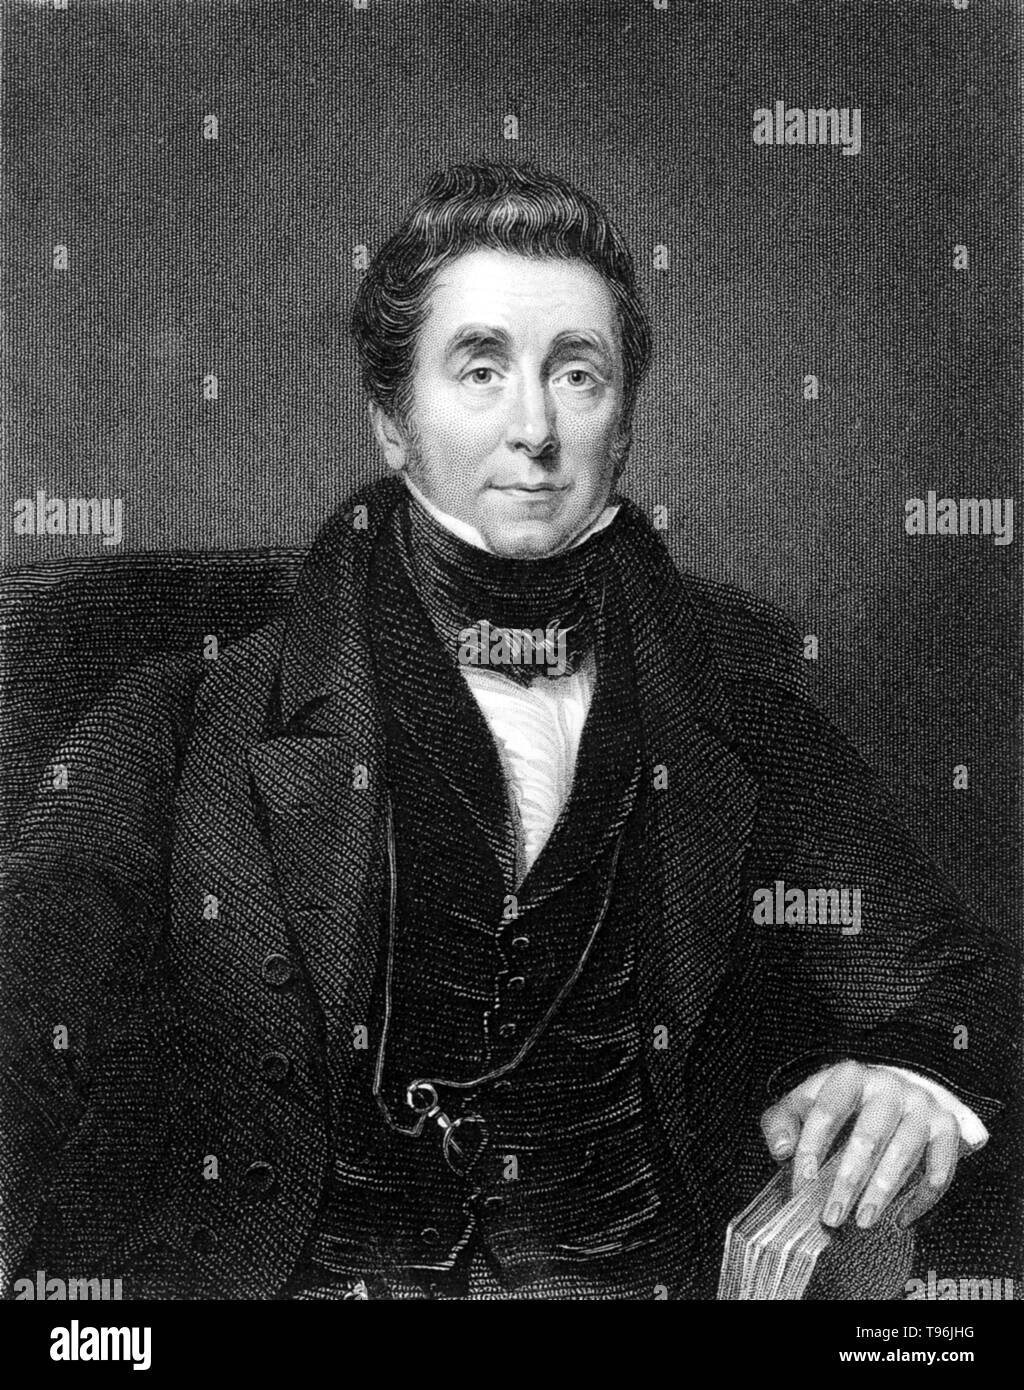 James Johnson (February 1777 - October 10, 1845) was an Irish physician and writer on diseases of tropical climates. Born in Ireland, at the early age of 15 he became an apprentice to a surgeon-apothecary. In 1798 he moved to London and passed the surgeon's examination. He was appointed surgeons's mate on a naval vessel. In 1800 he took part in an expedition to Egypt and, in 1803, sailed for India. Stock Photo